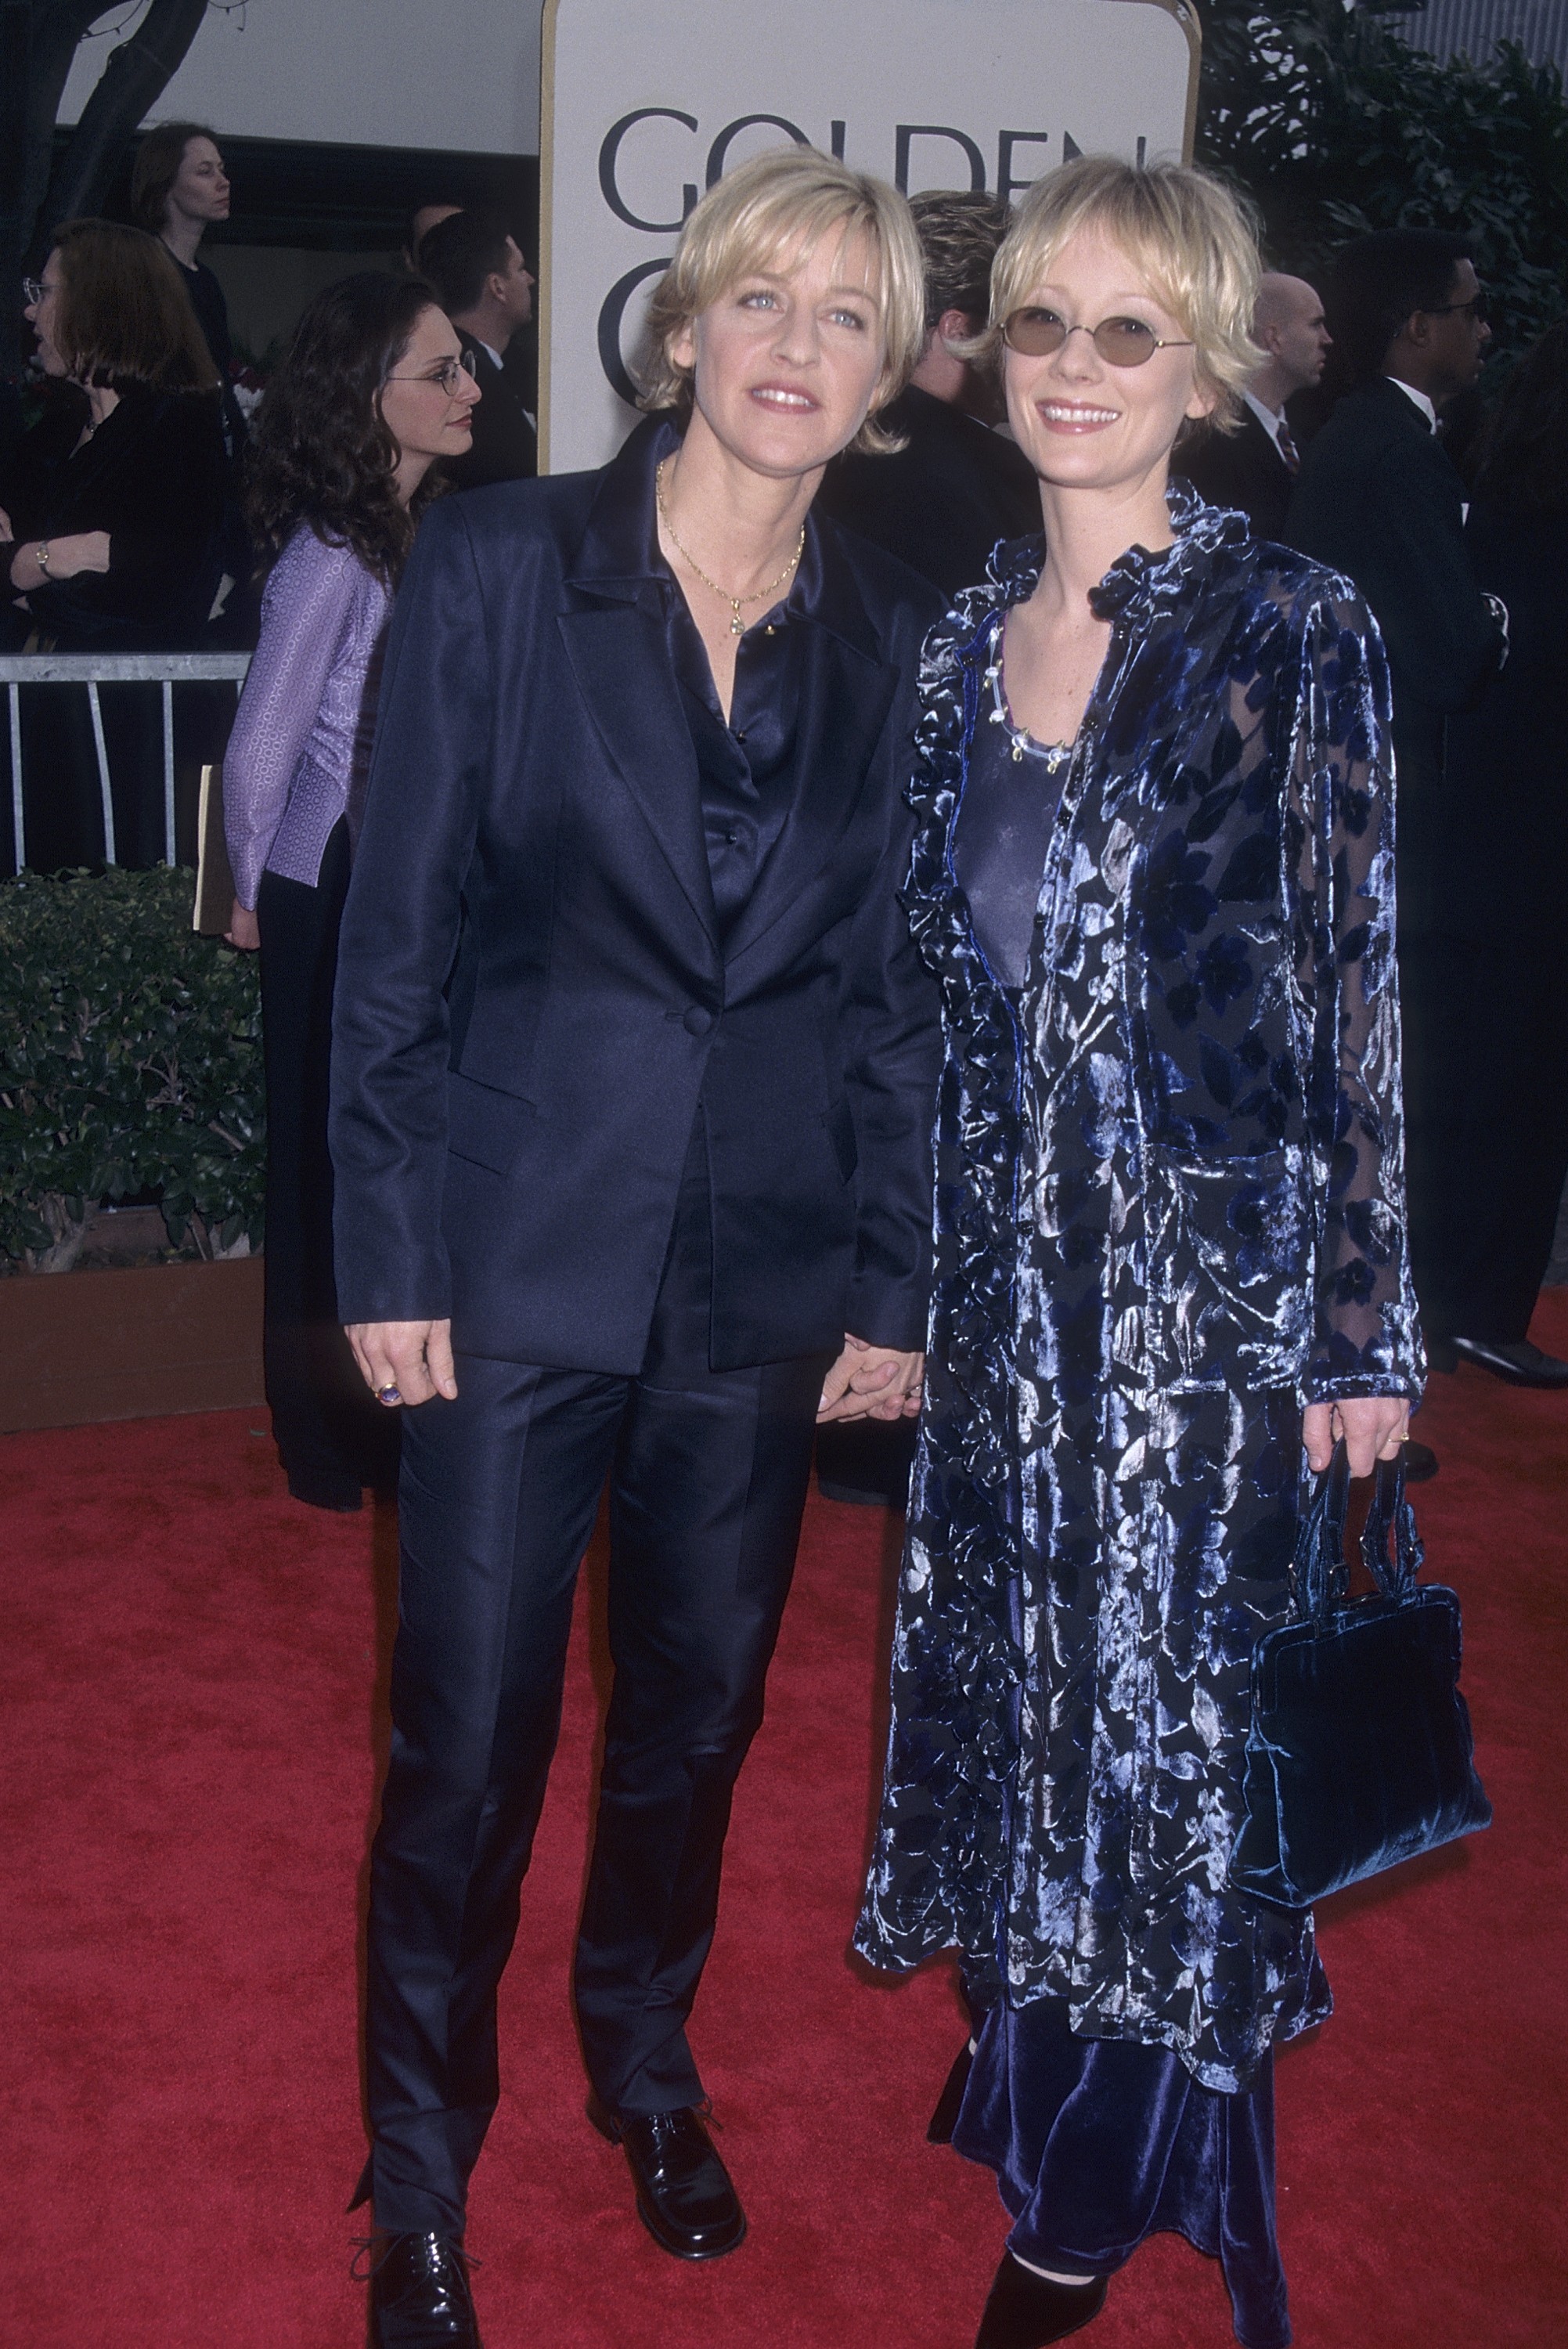 BEVERLY HILLS, CA - JANUARY 18:   Comedienne Ellen DeGeneres and actress Anne Heche attend the 55th Annual Golden Globe Awards on January 18, 1998 at the Beverly Hilton Hotel in Beverly Hills, California. (Photo by Ron Galella, Ltd./Ron Galella Collection (Foto: Ron Galella Collection via Getty)